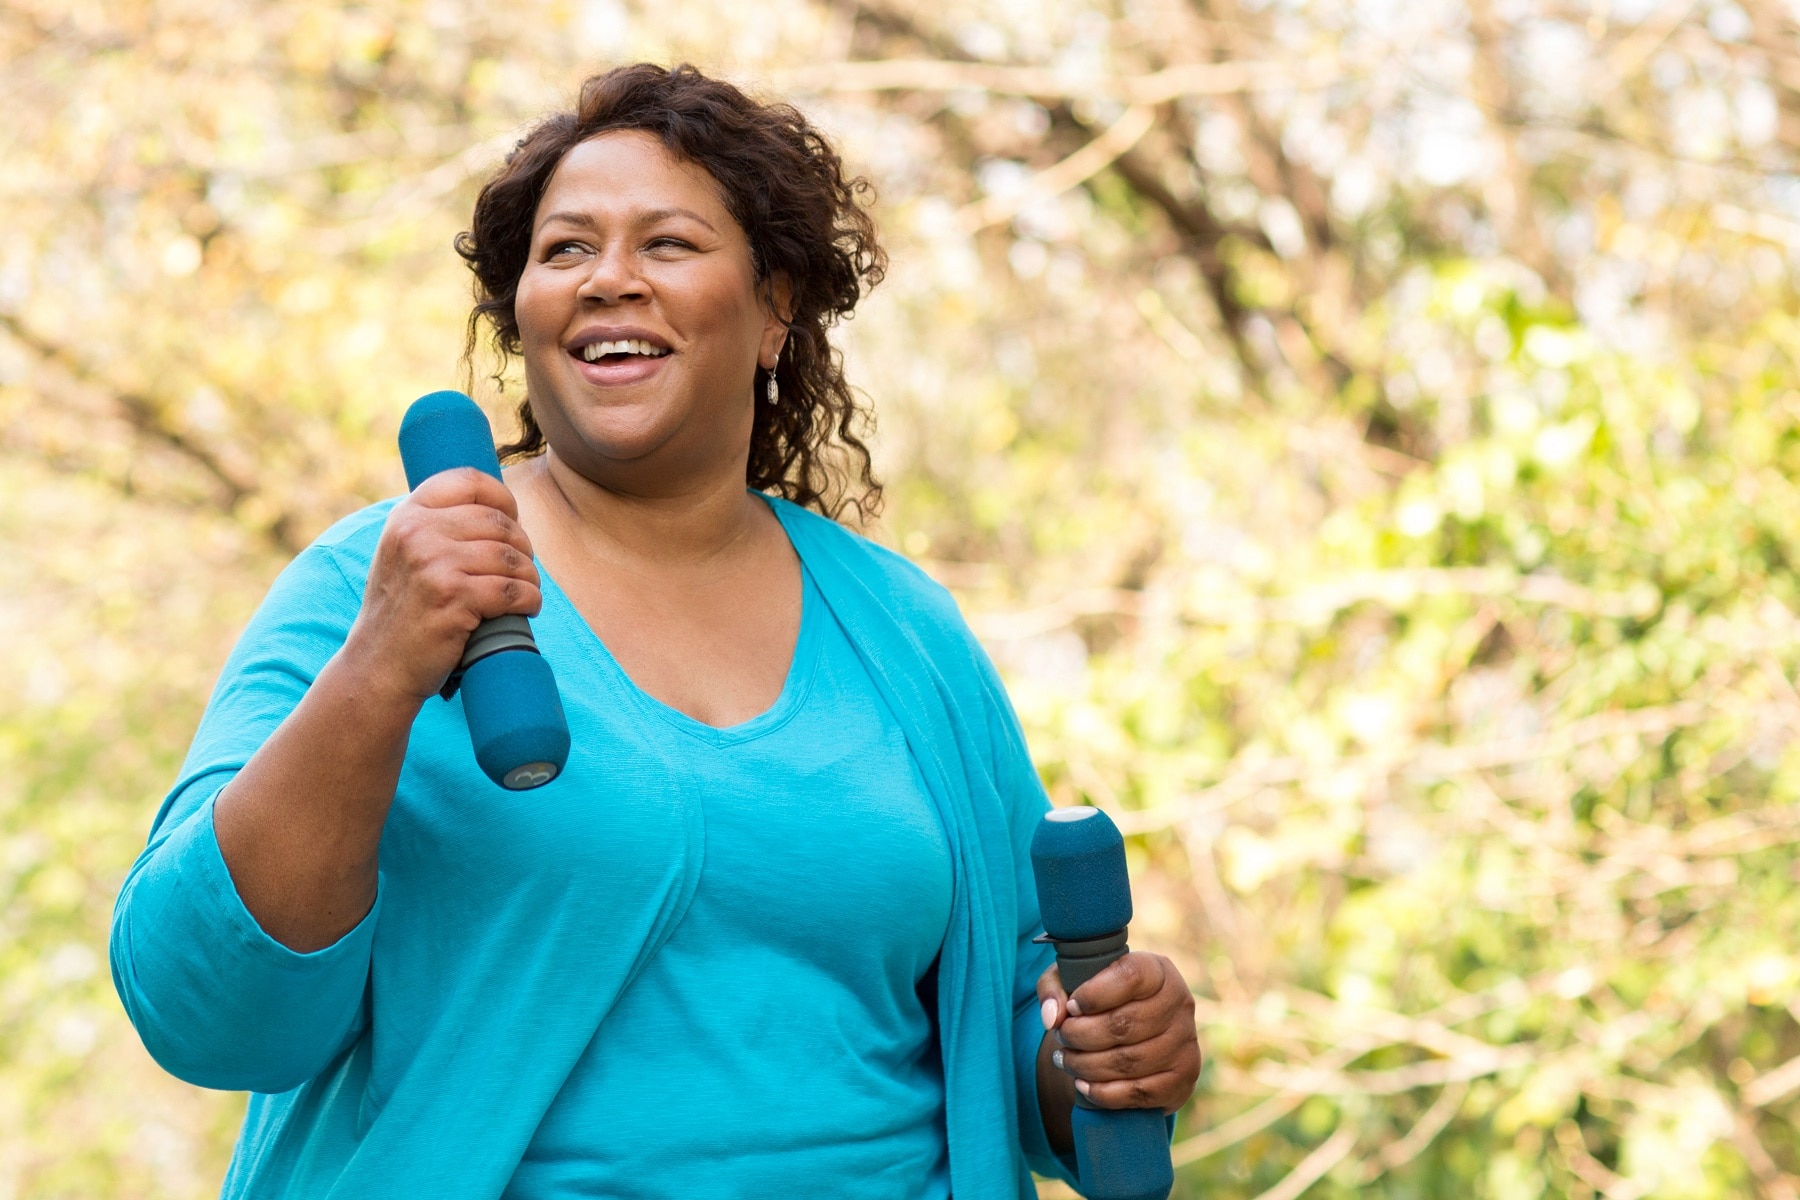 Mature African American woman smiling and exercising.